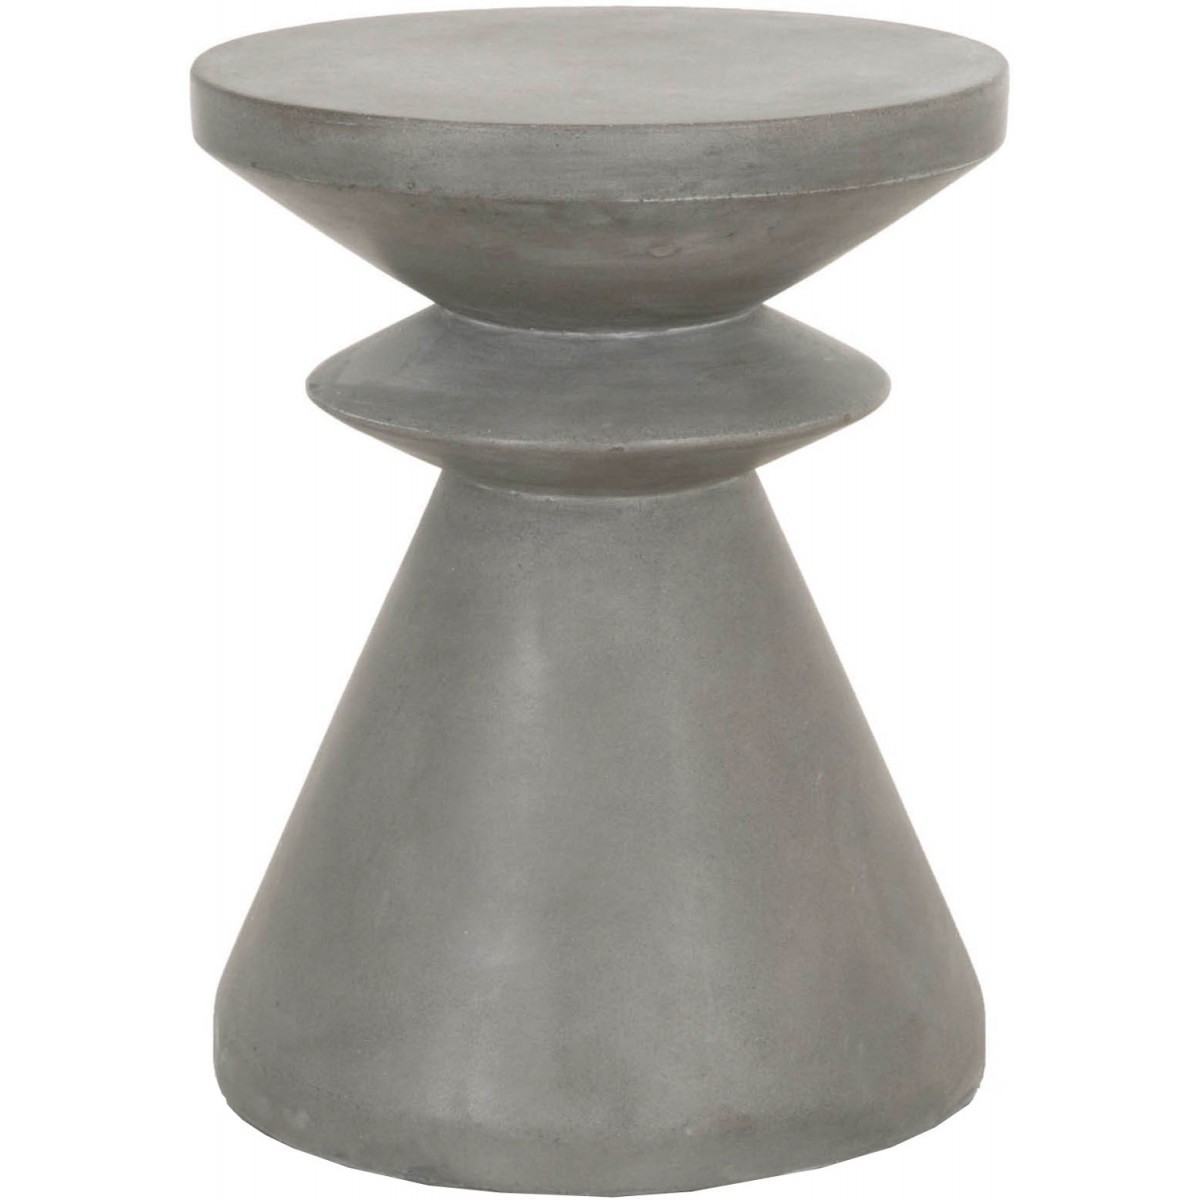 star international district pawn accent table slate grey end concrete medium oak tables patio occasional large cover front door threshold plate center cloth oblong tablecloth